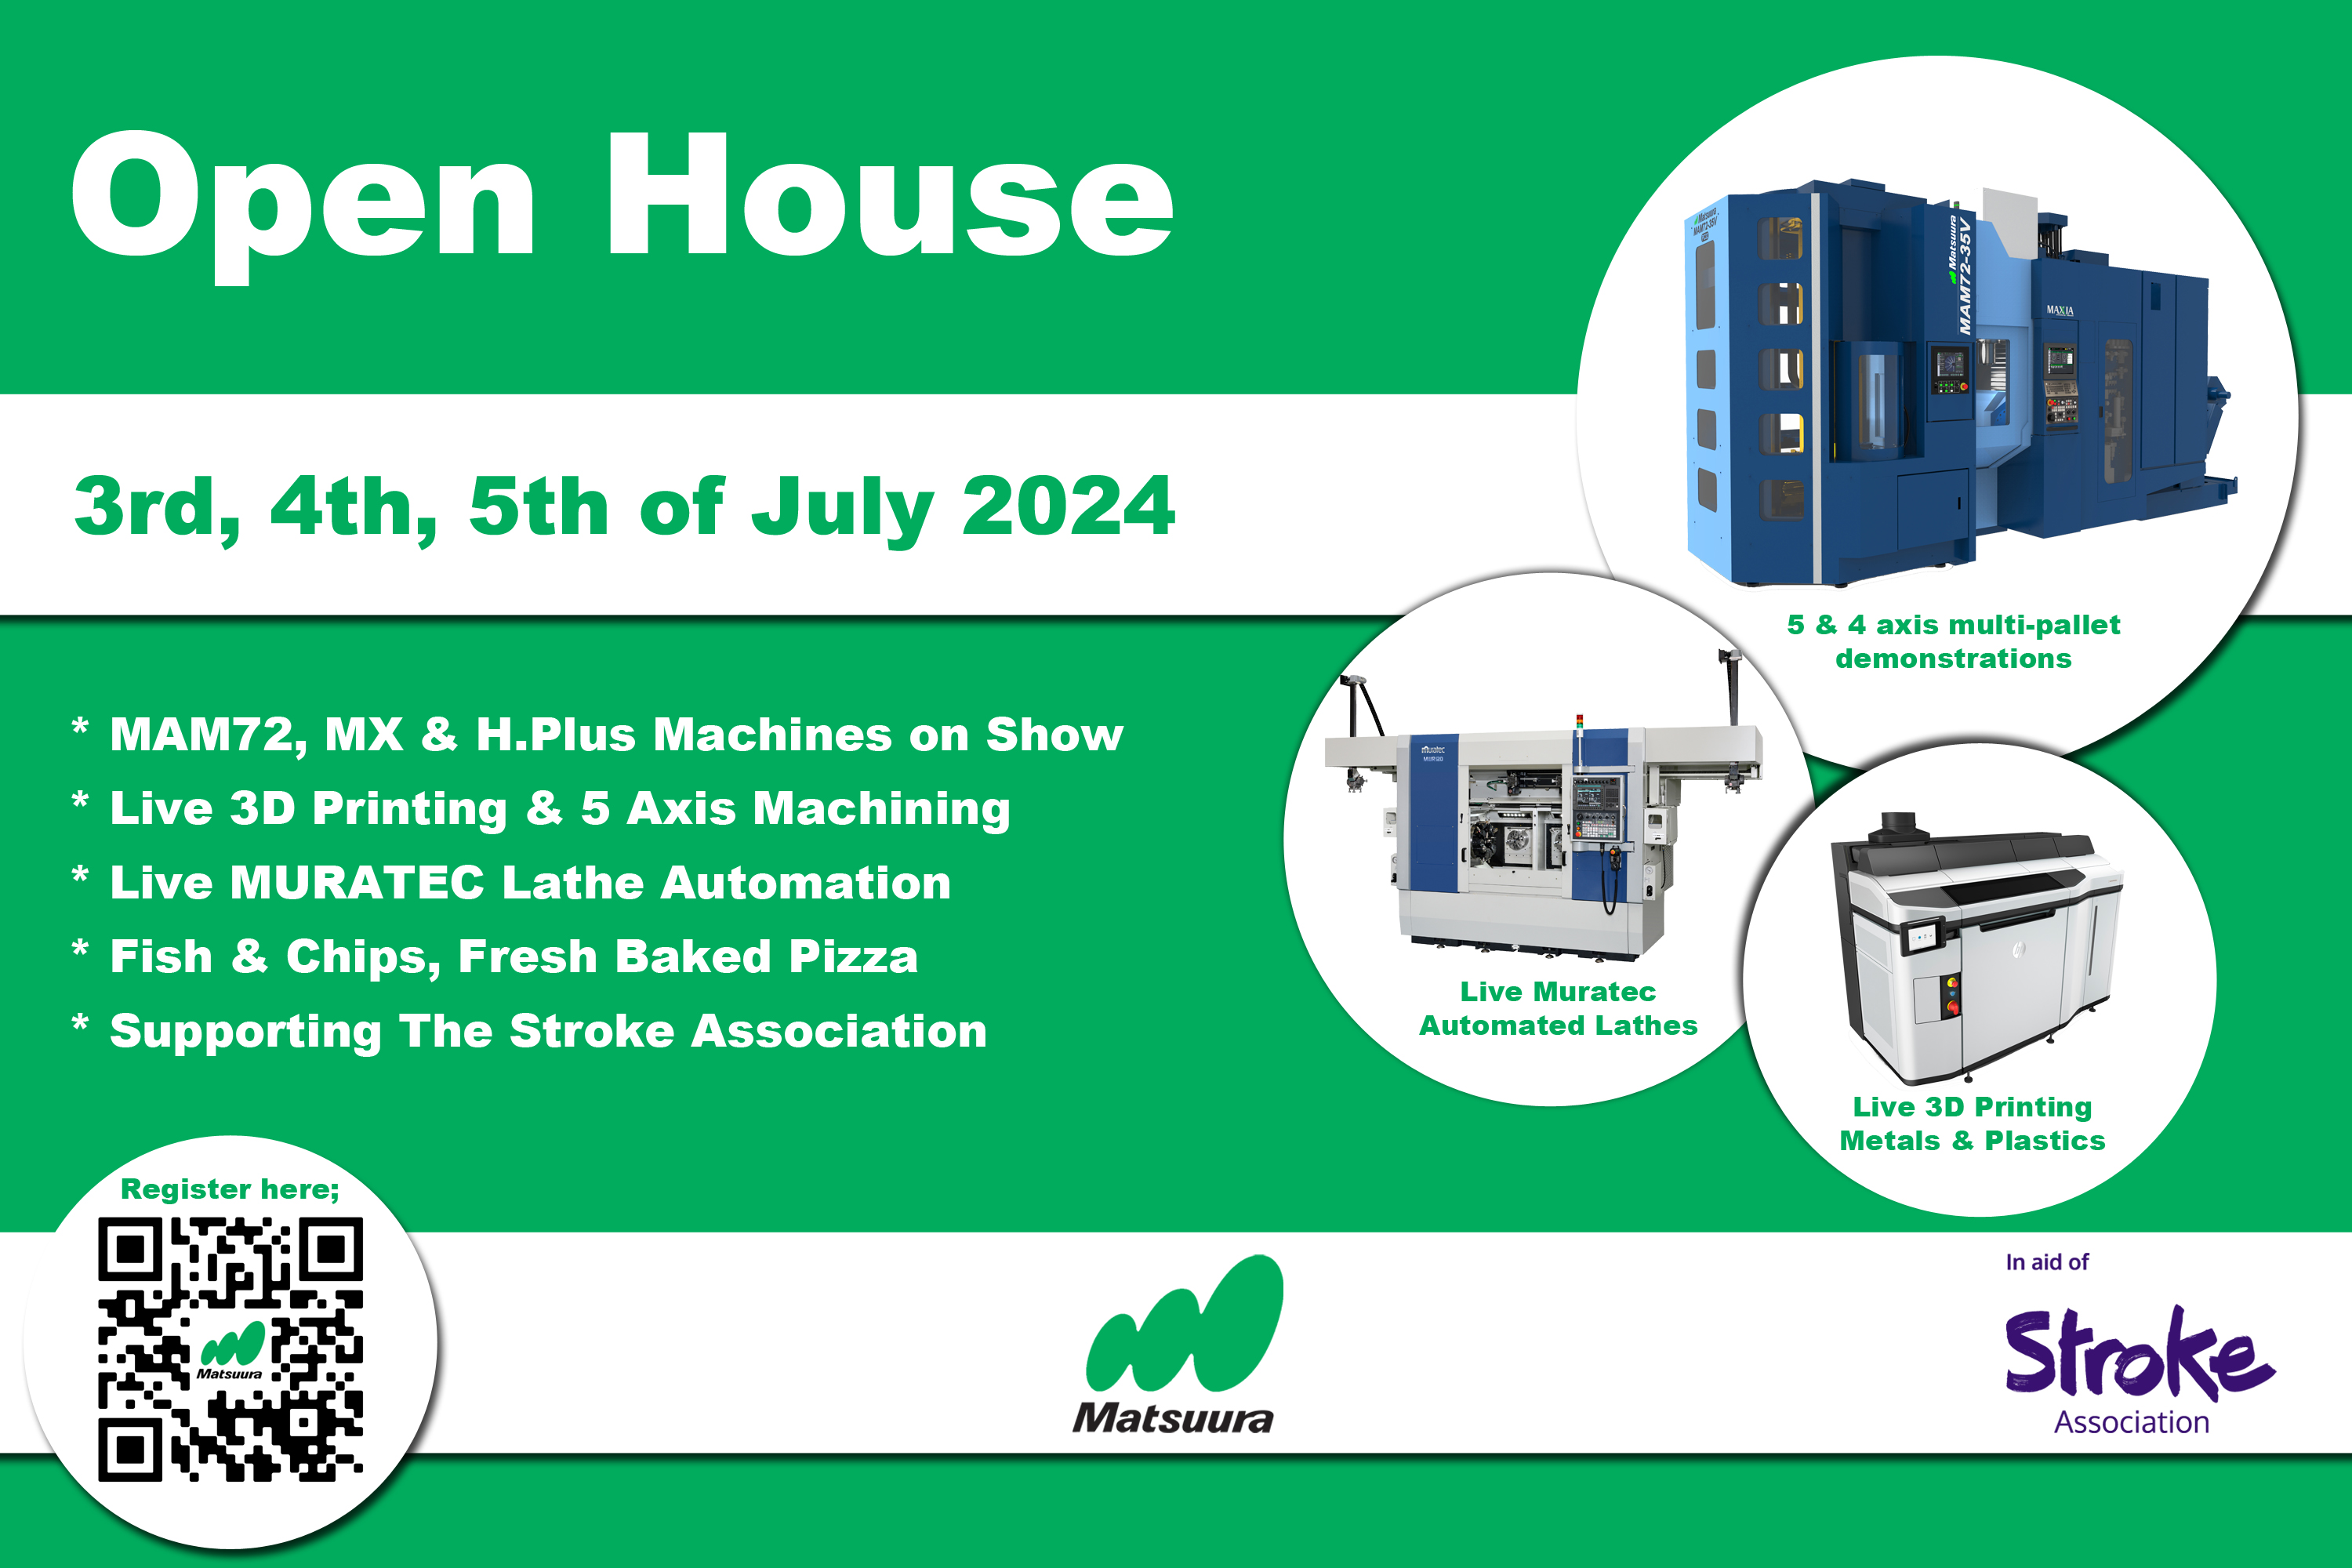 Matsuura Open House 2024; July 3rd, 4th and 5th.